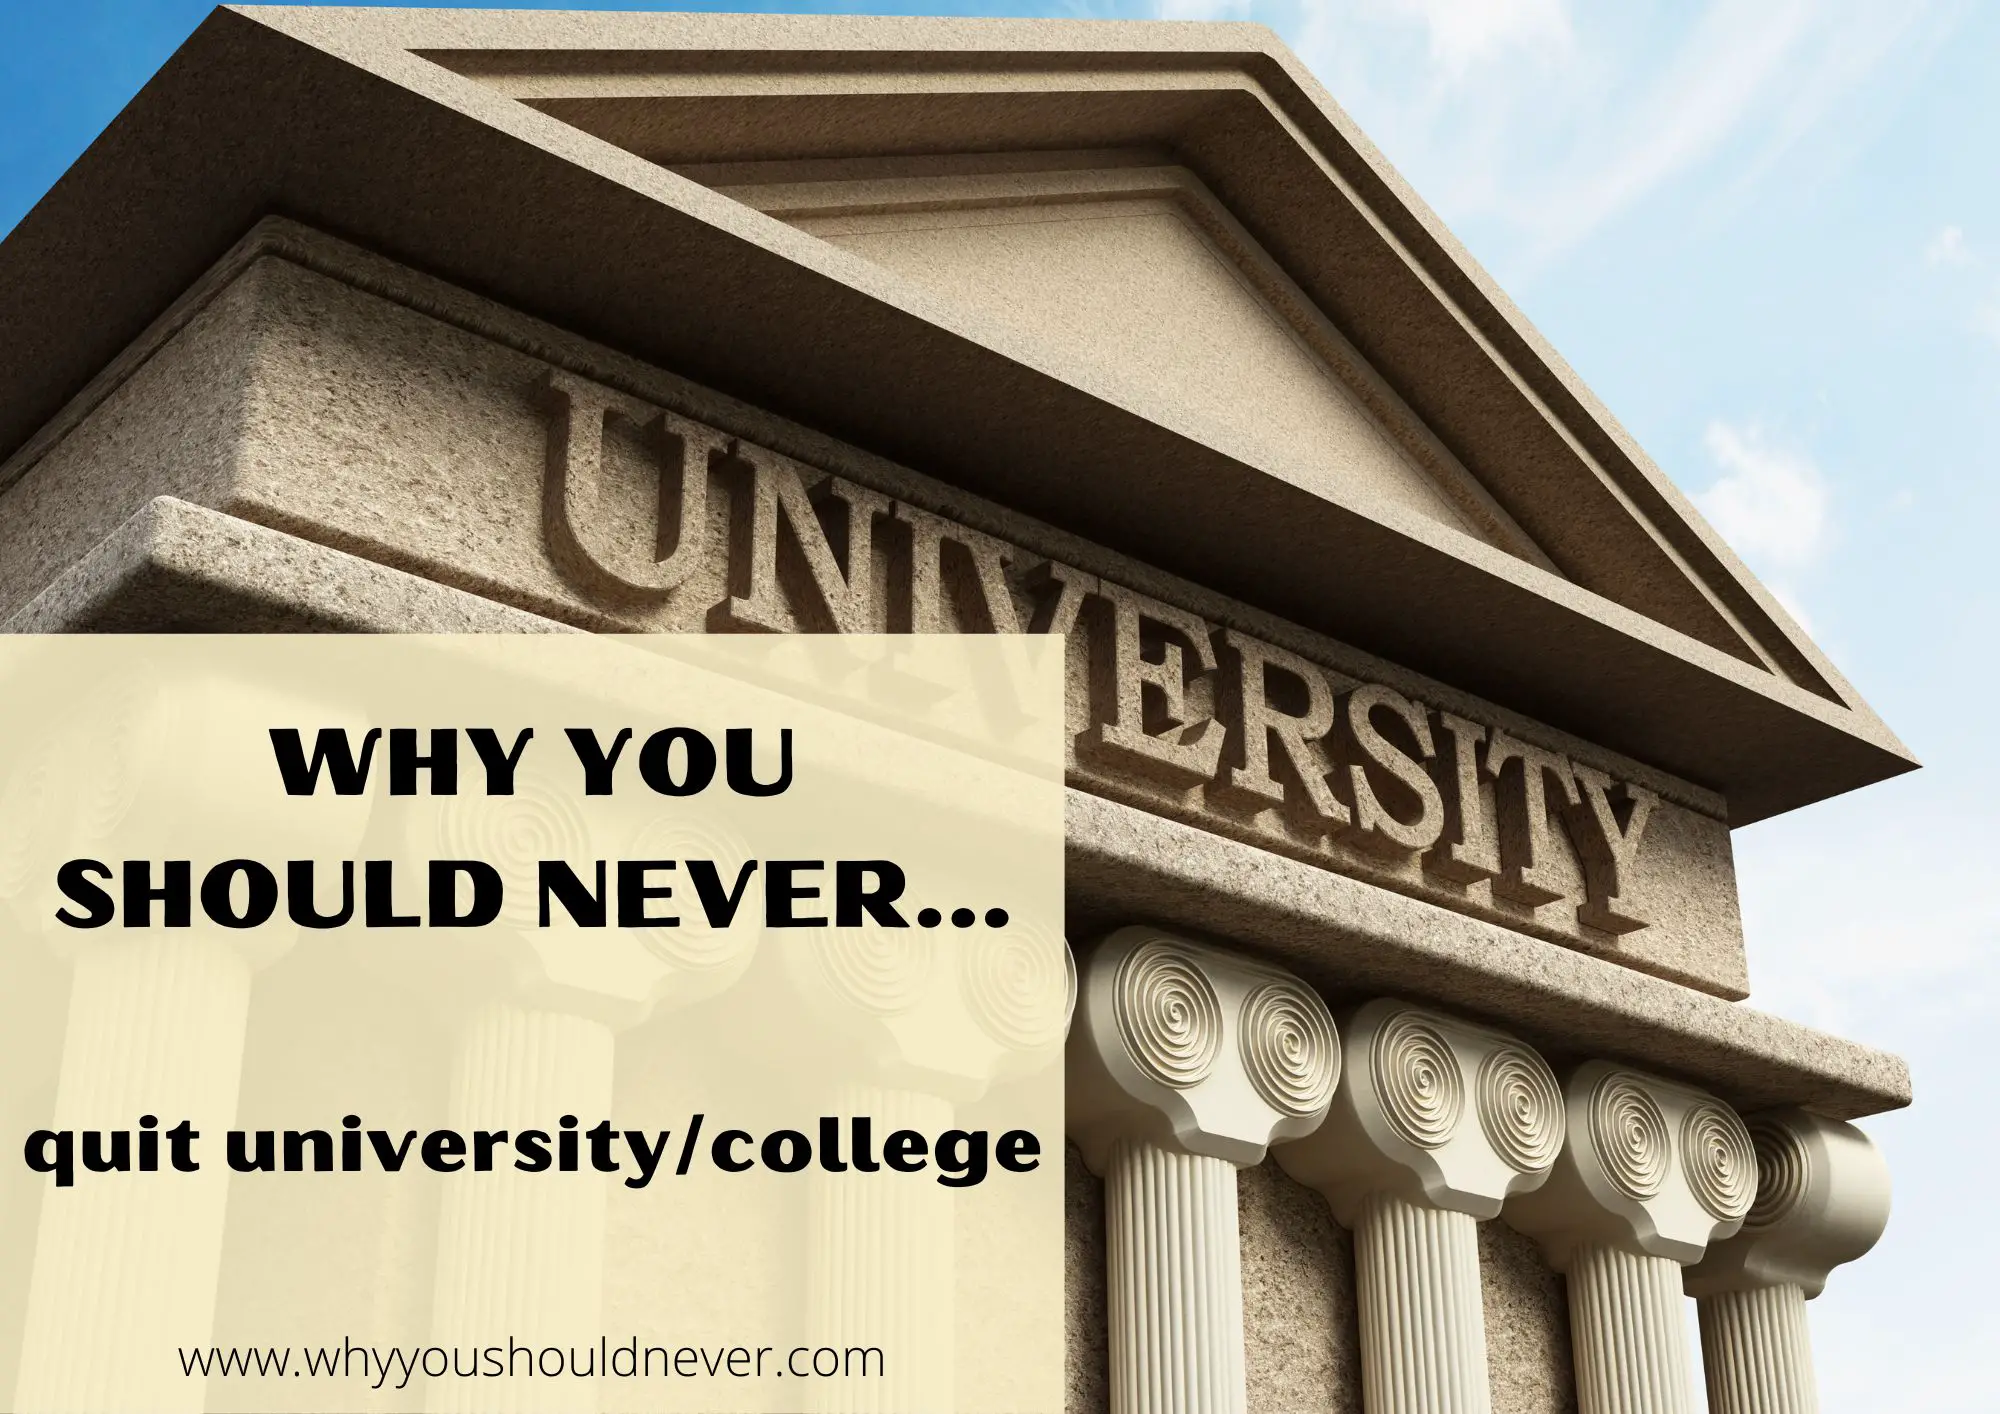 Why You Should Never Quit University/College